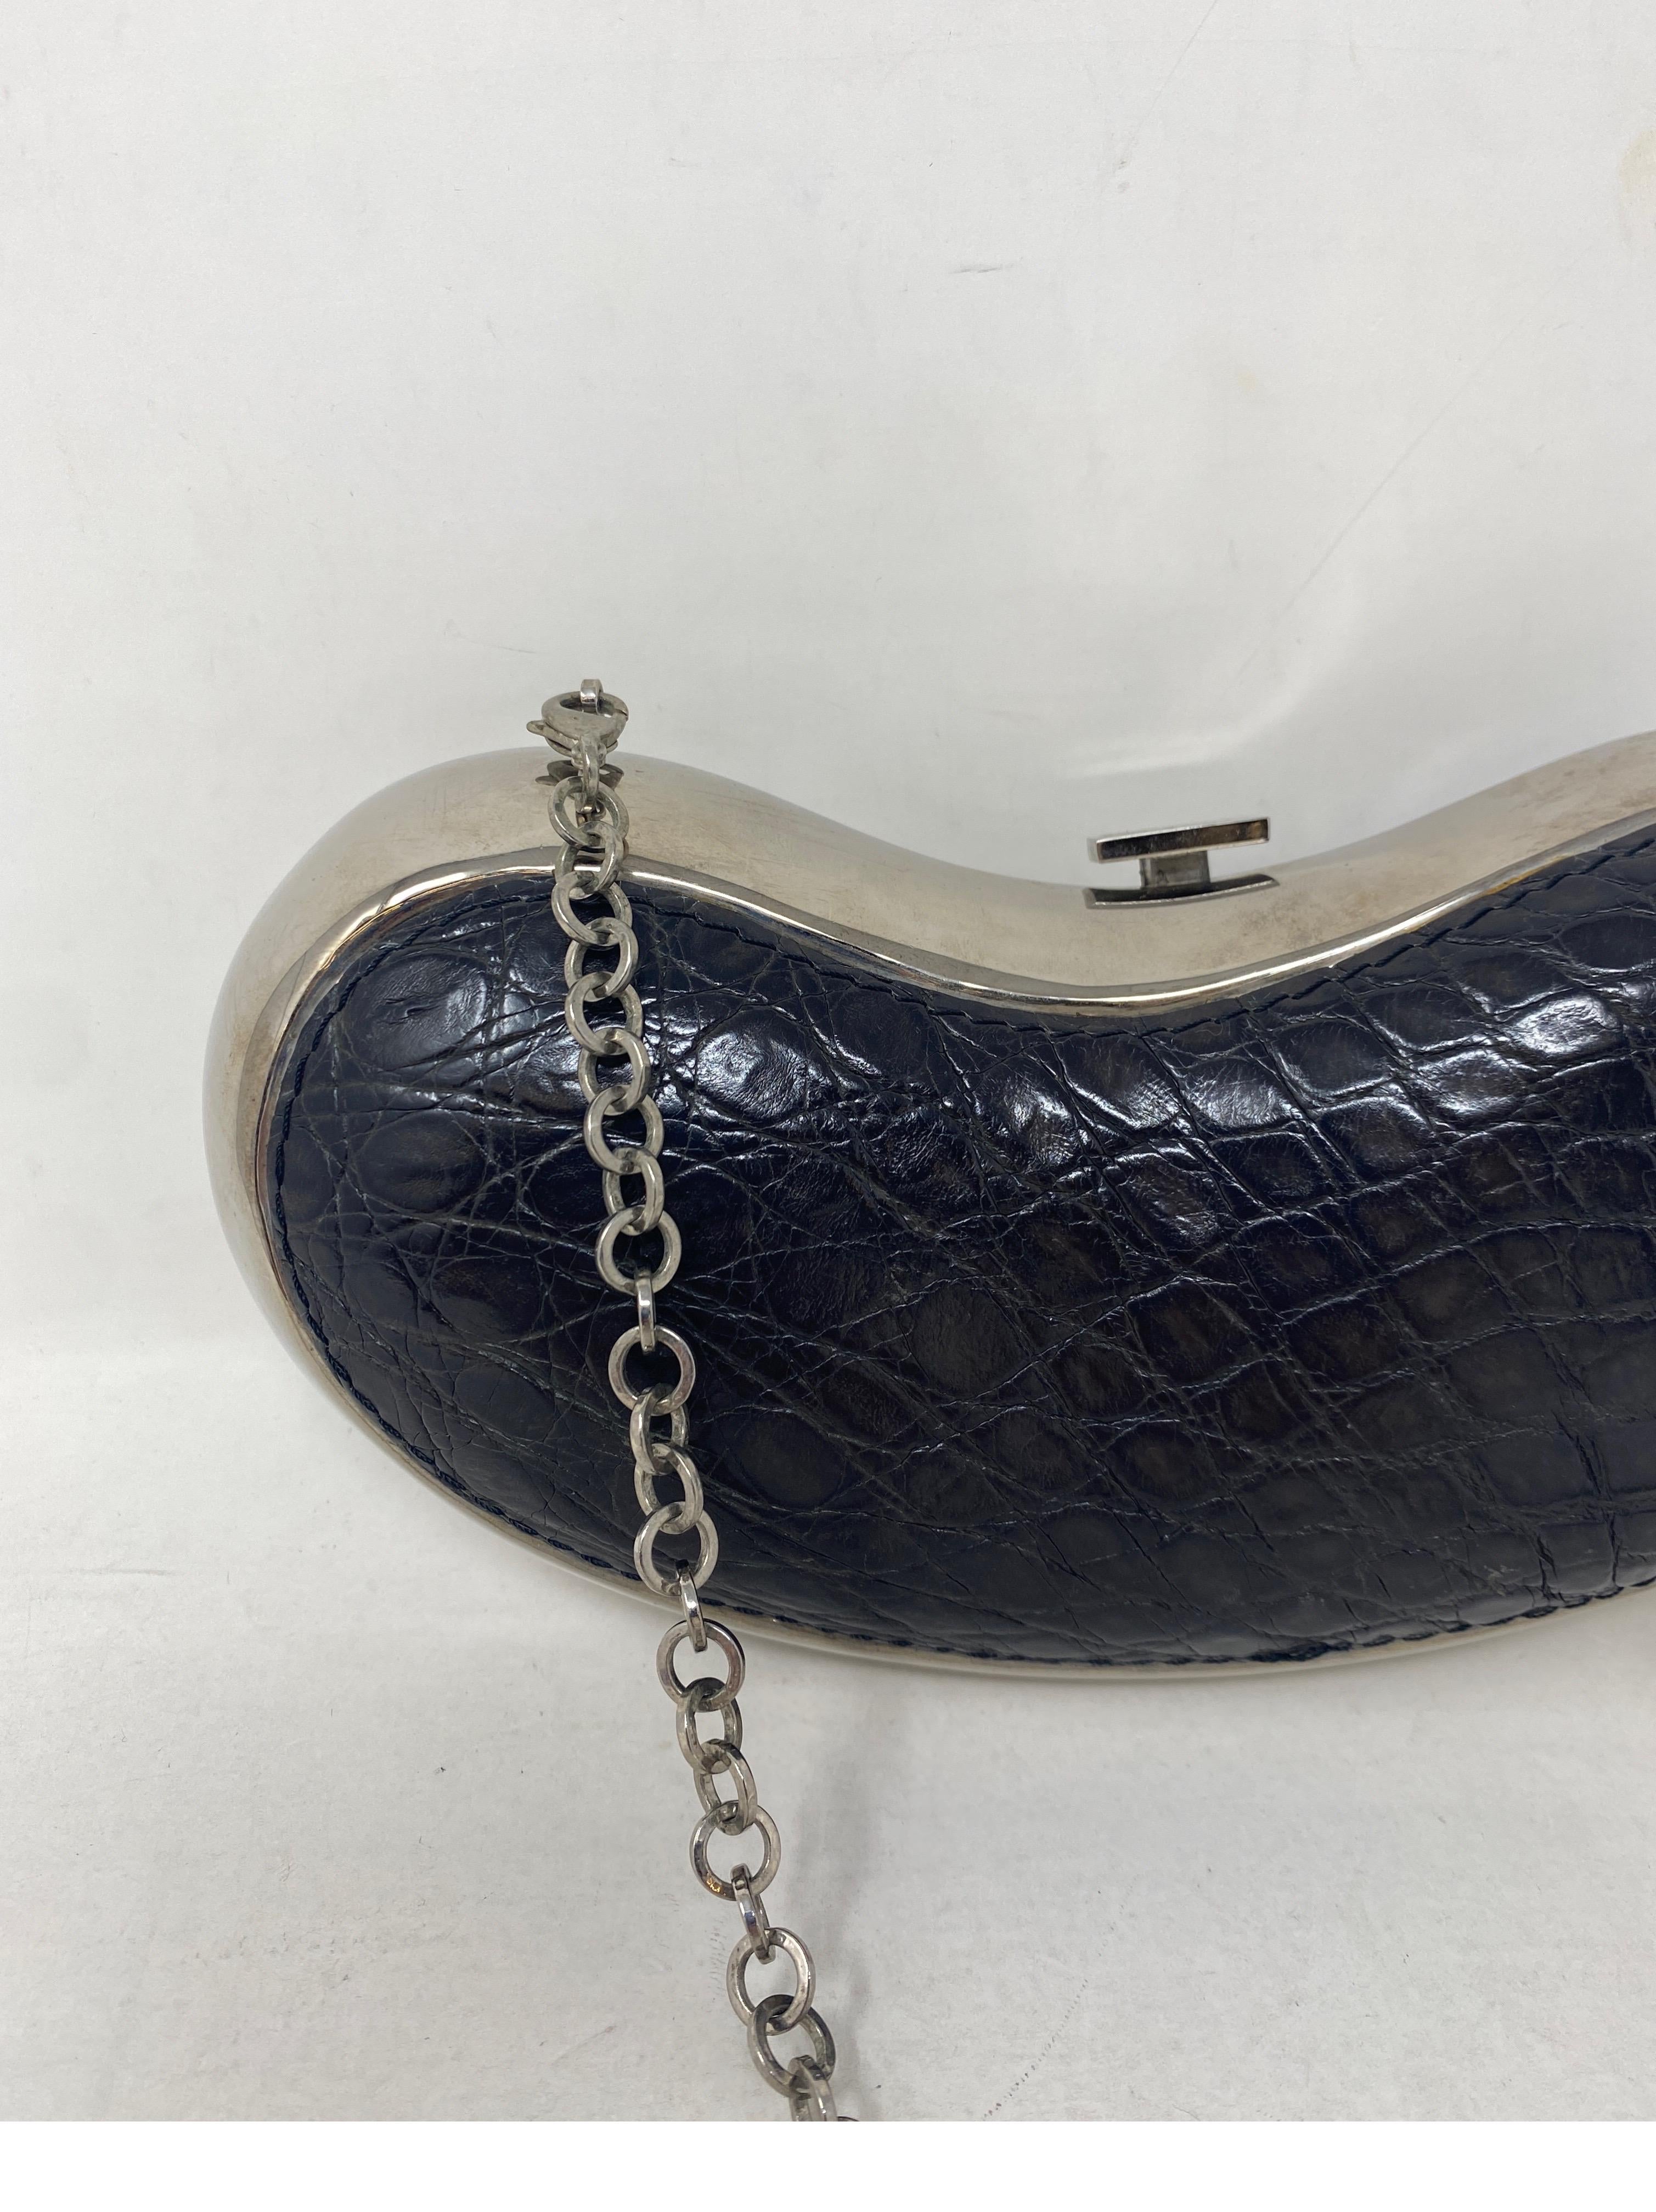 Salvatore Ferragamo Kidney Bean Shape Alligator Leather Bag. Black alligator embossed leather. Silver metal bag. Unique and rare style. Collector's piece. Can be worn as a shoulder bag or as a clutch. Guaranteed authentic. 